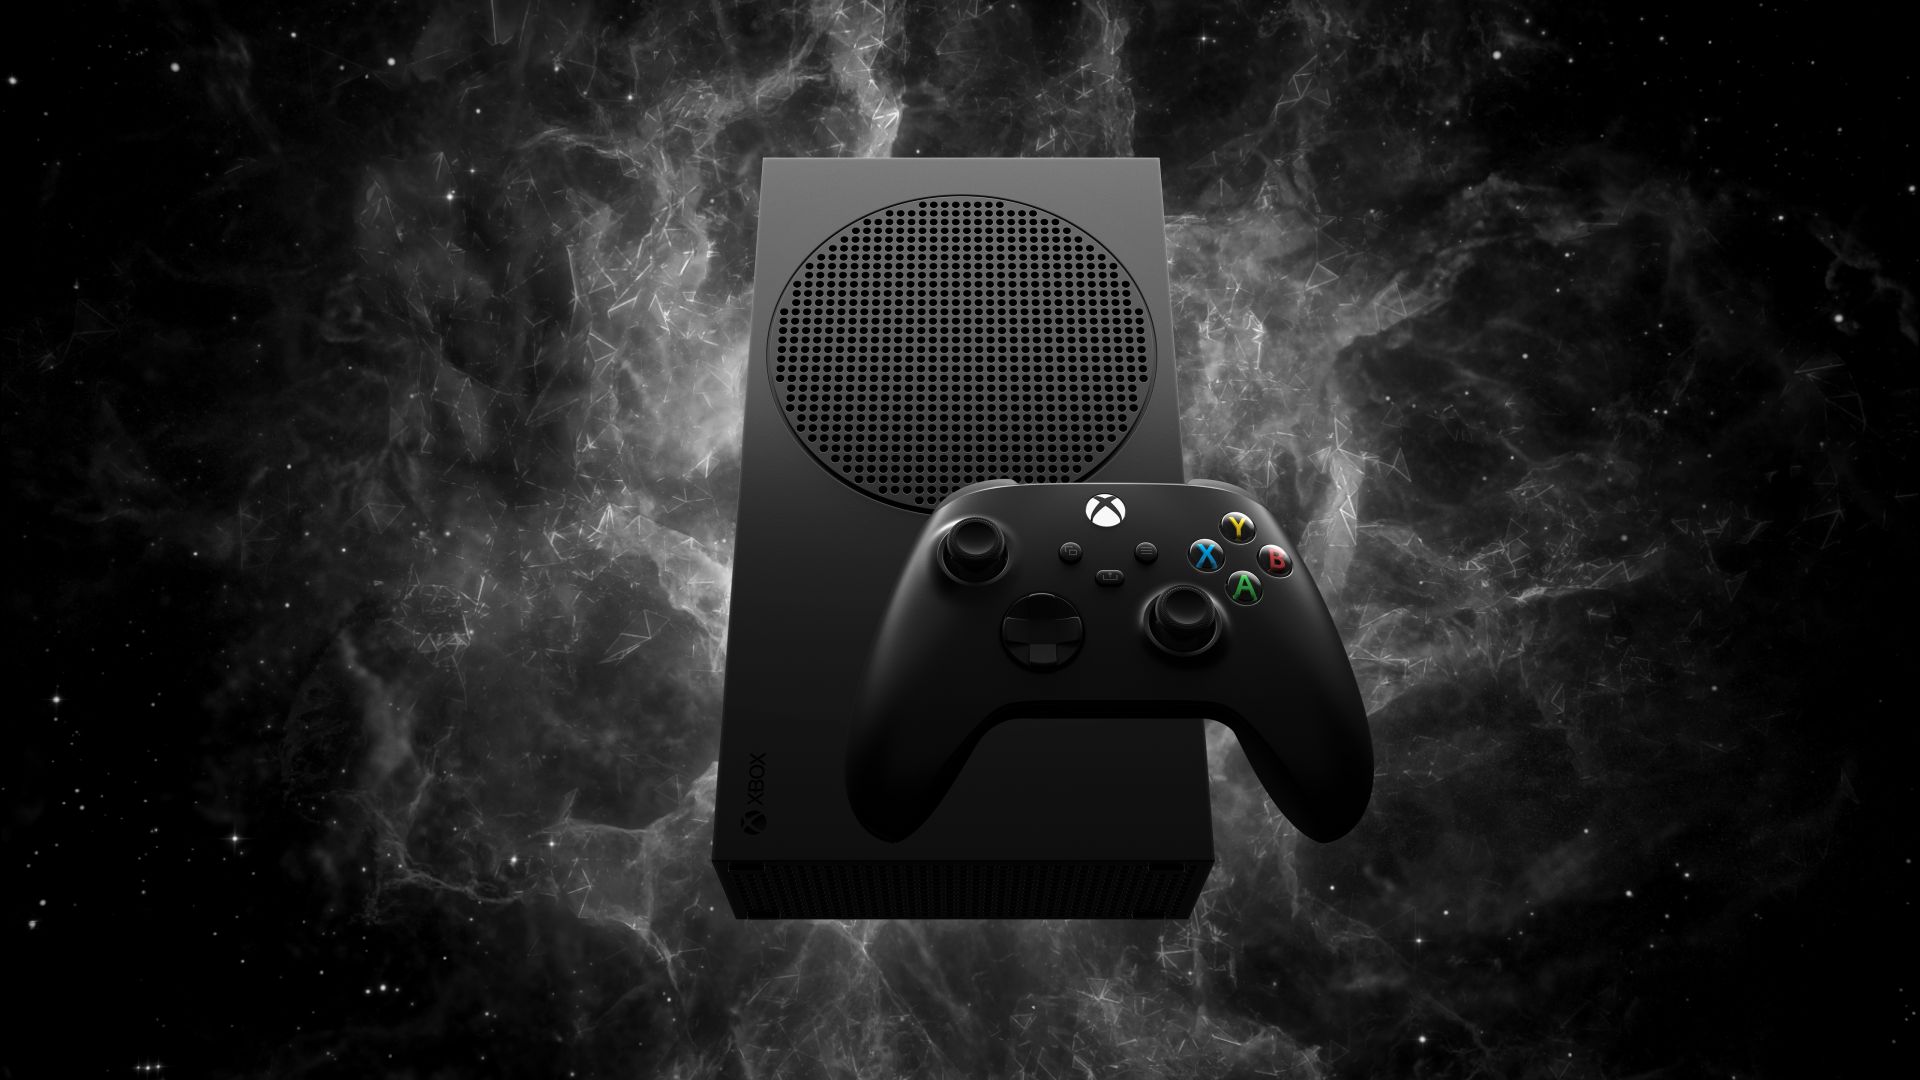 Back in Black, Xbox Series S is Now Available with a 1TB SSD